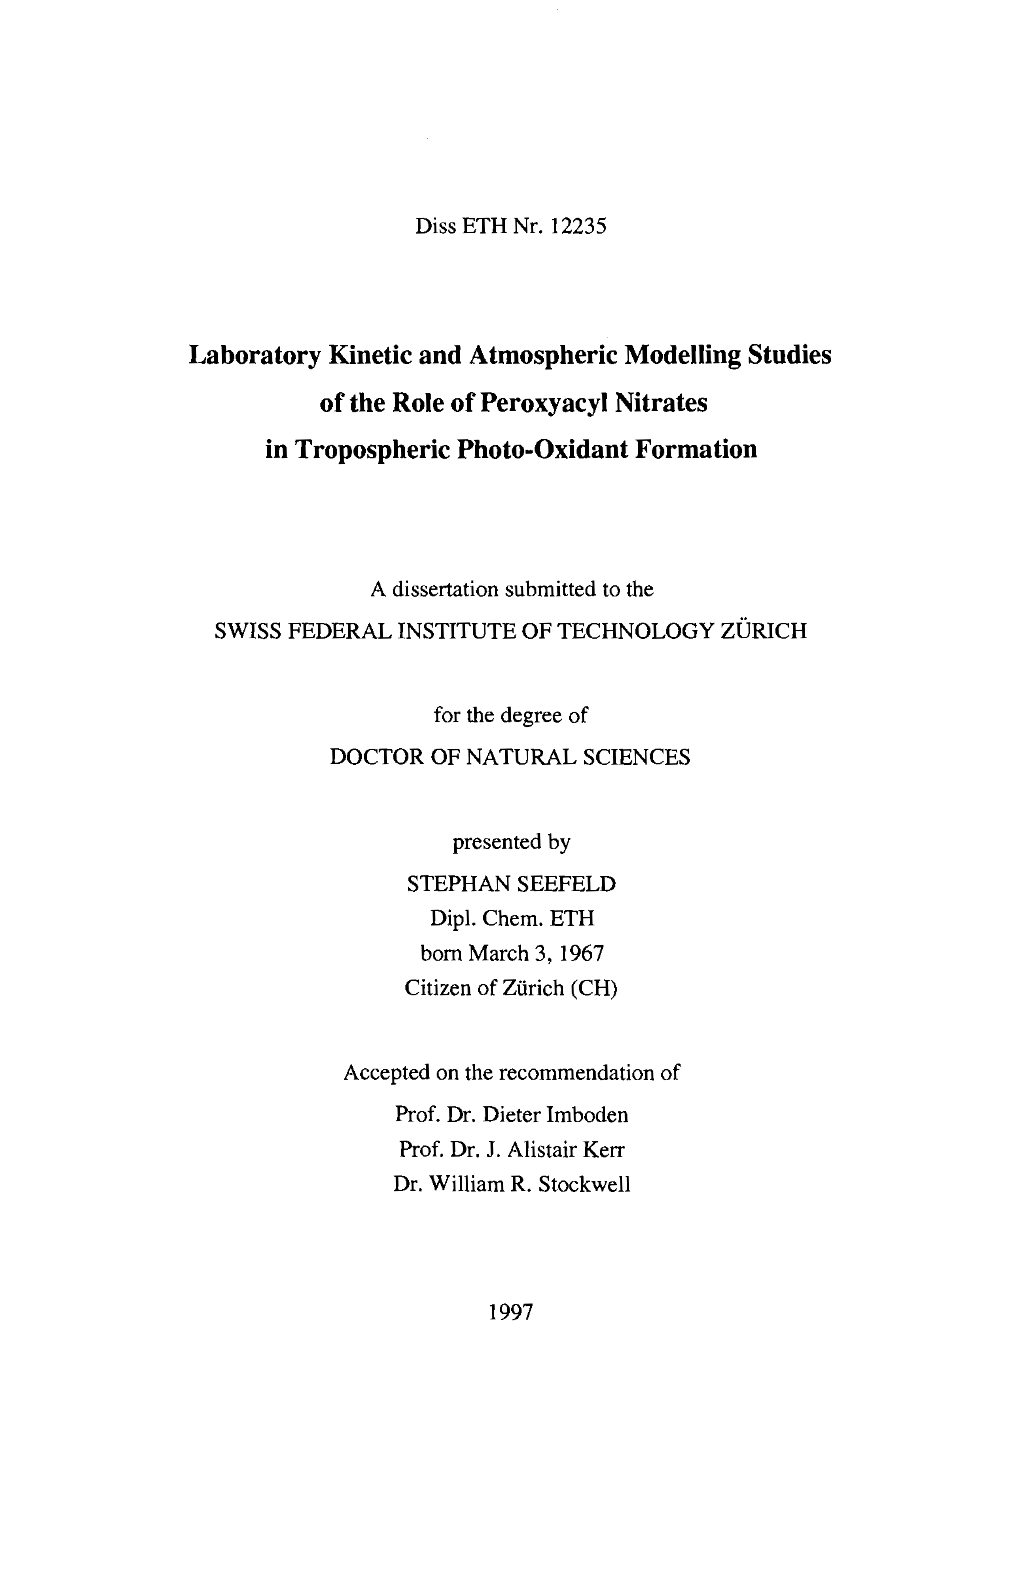 Laboratory Kinetic and Atmospheric Modelling Studies of the Role of Peroxyacyl Nitrates in Tropospheric Photo-Oxidant Formation